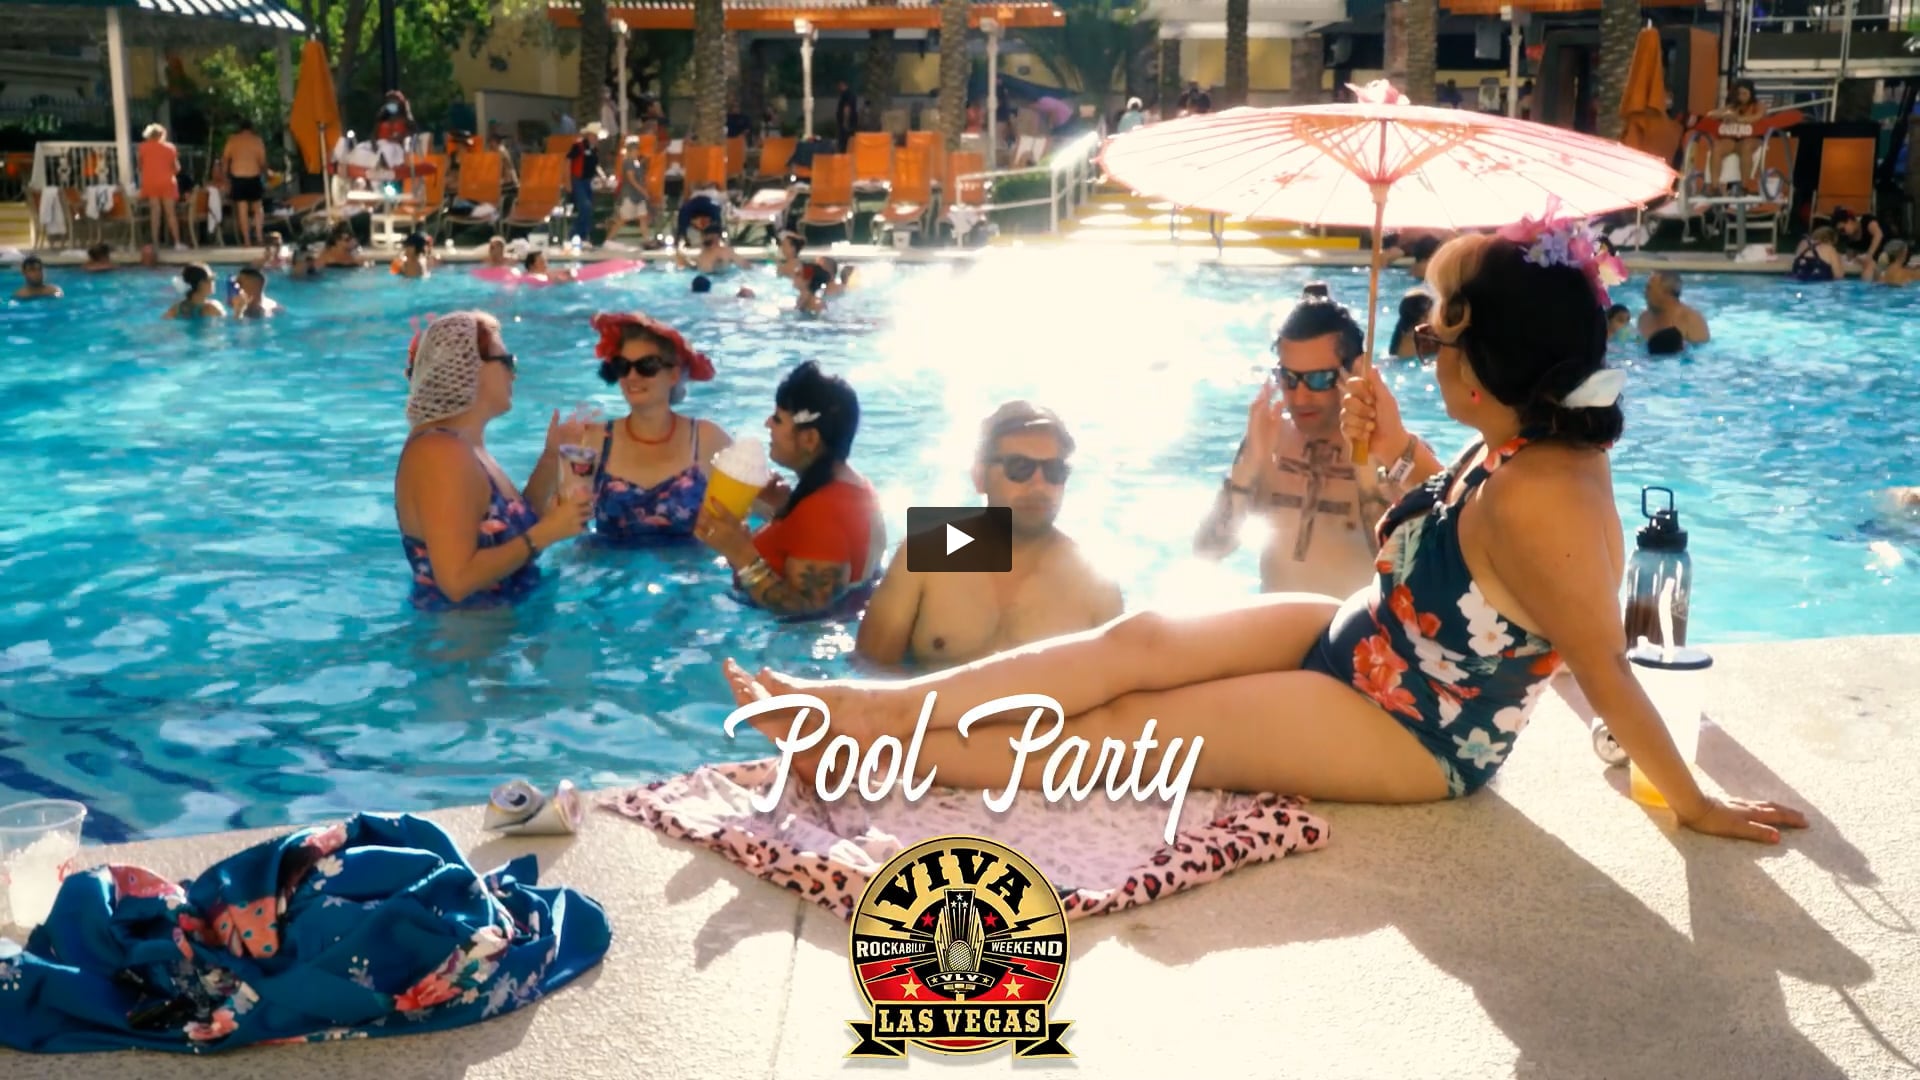 VLV24 POOL PARTY